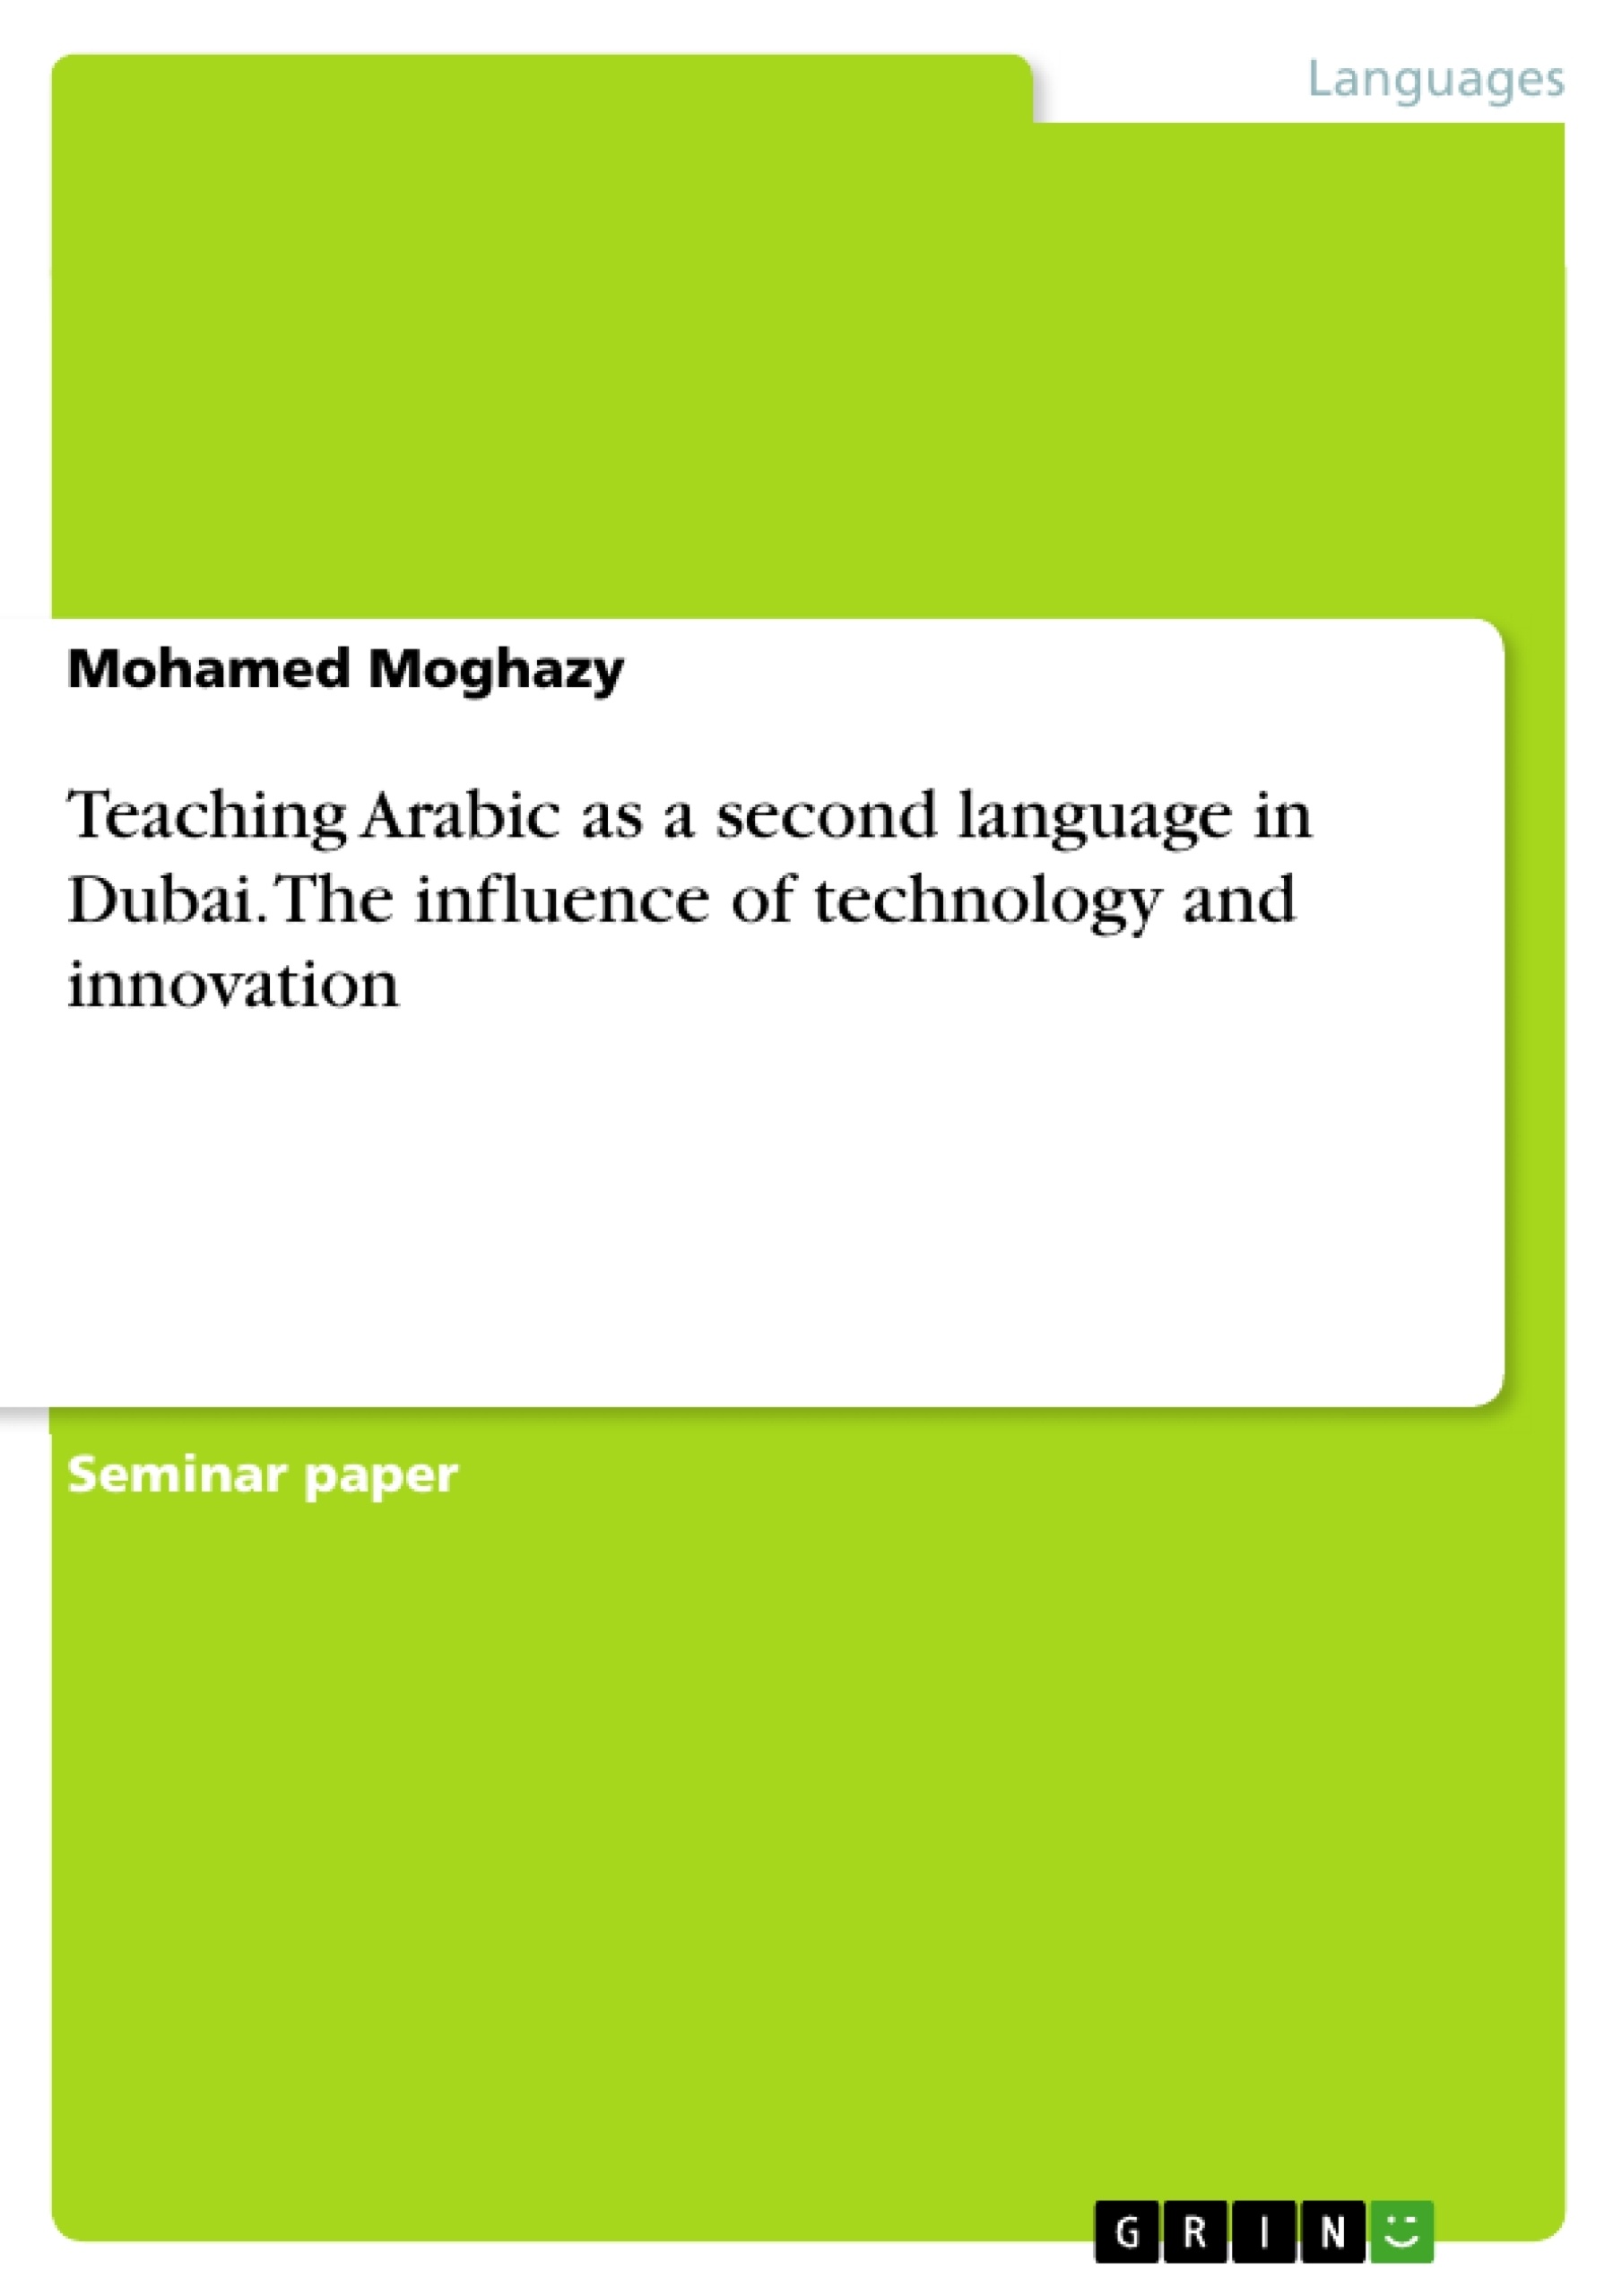 Title: Teaching Arabic as a second language in Dubai. The influence of technology and innovation